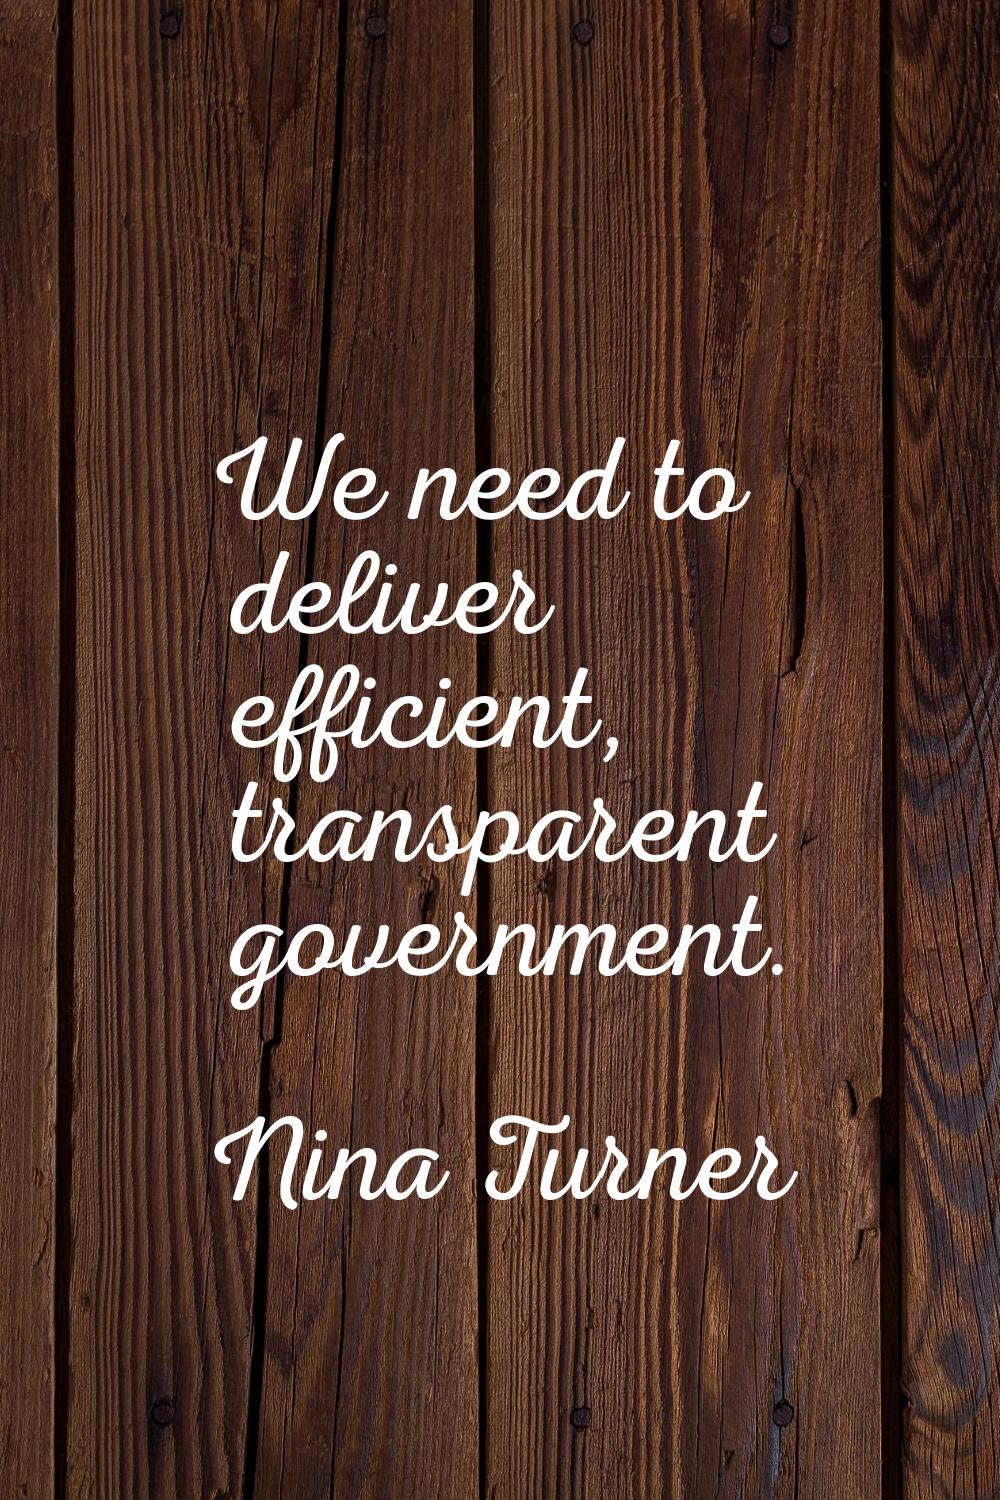 We need to deliver efficient, transparent government.